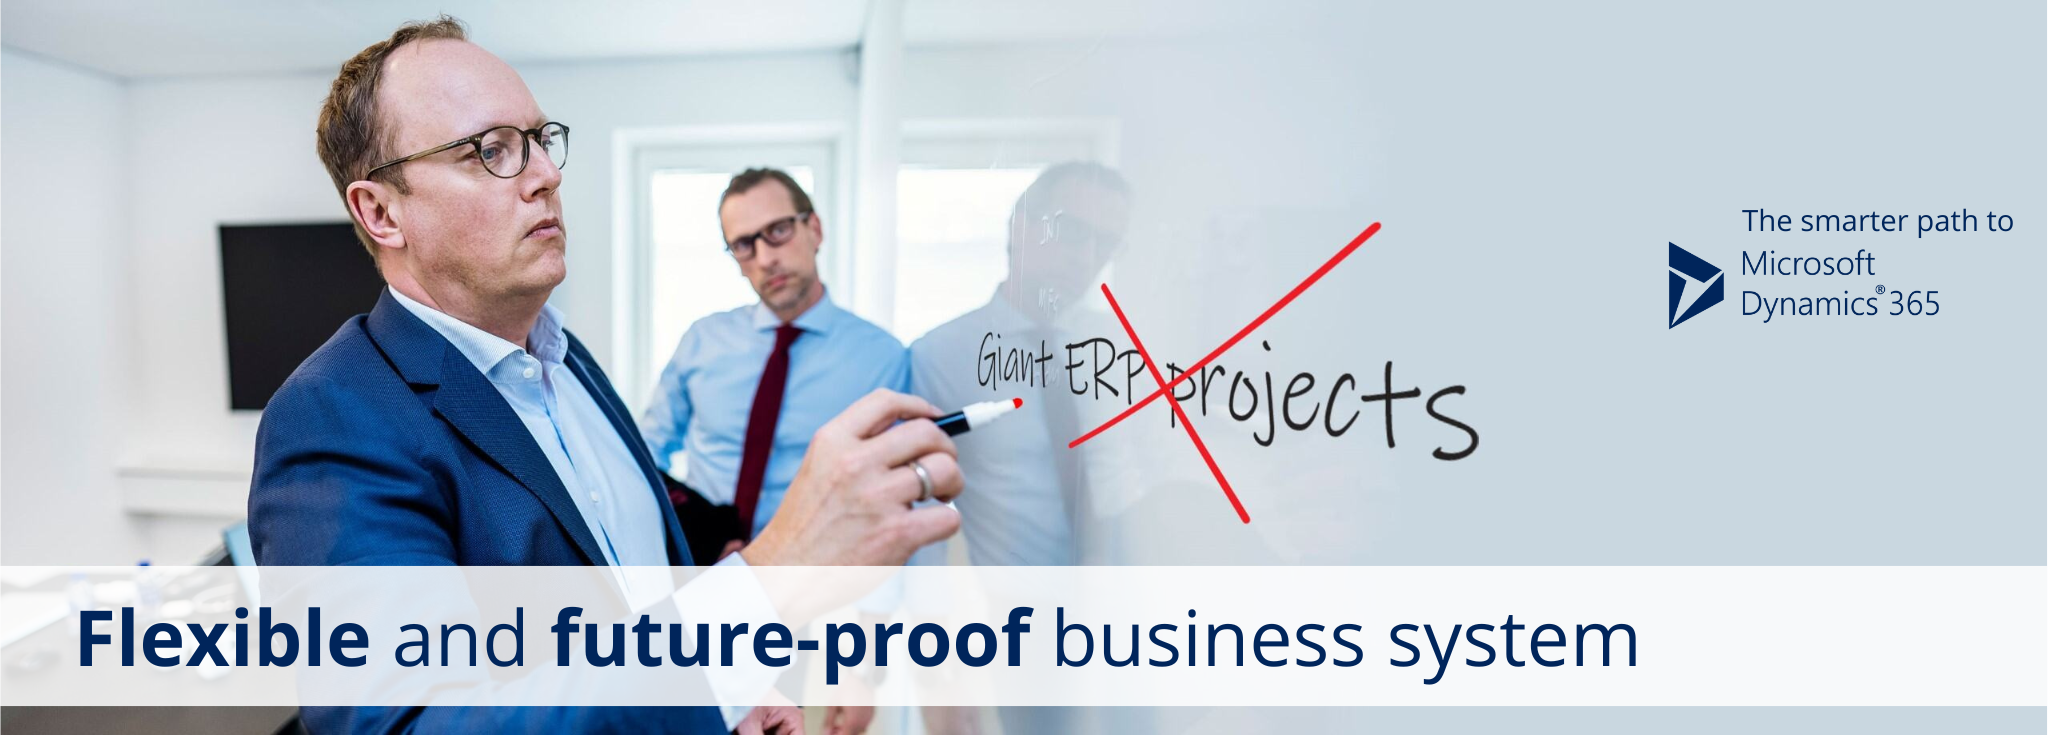 Two professionals are looking at a whiteboard crossing out "Giant ERP Projects"